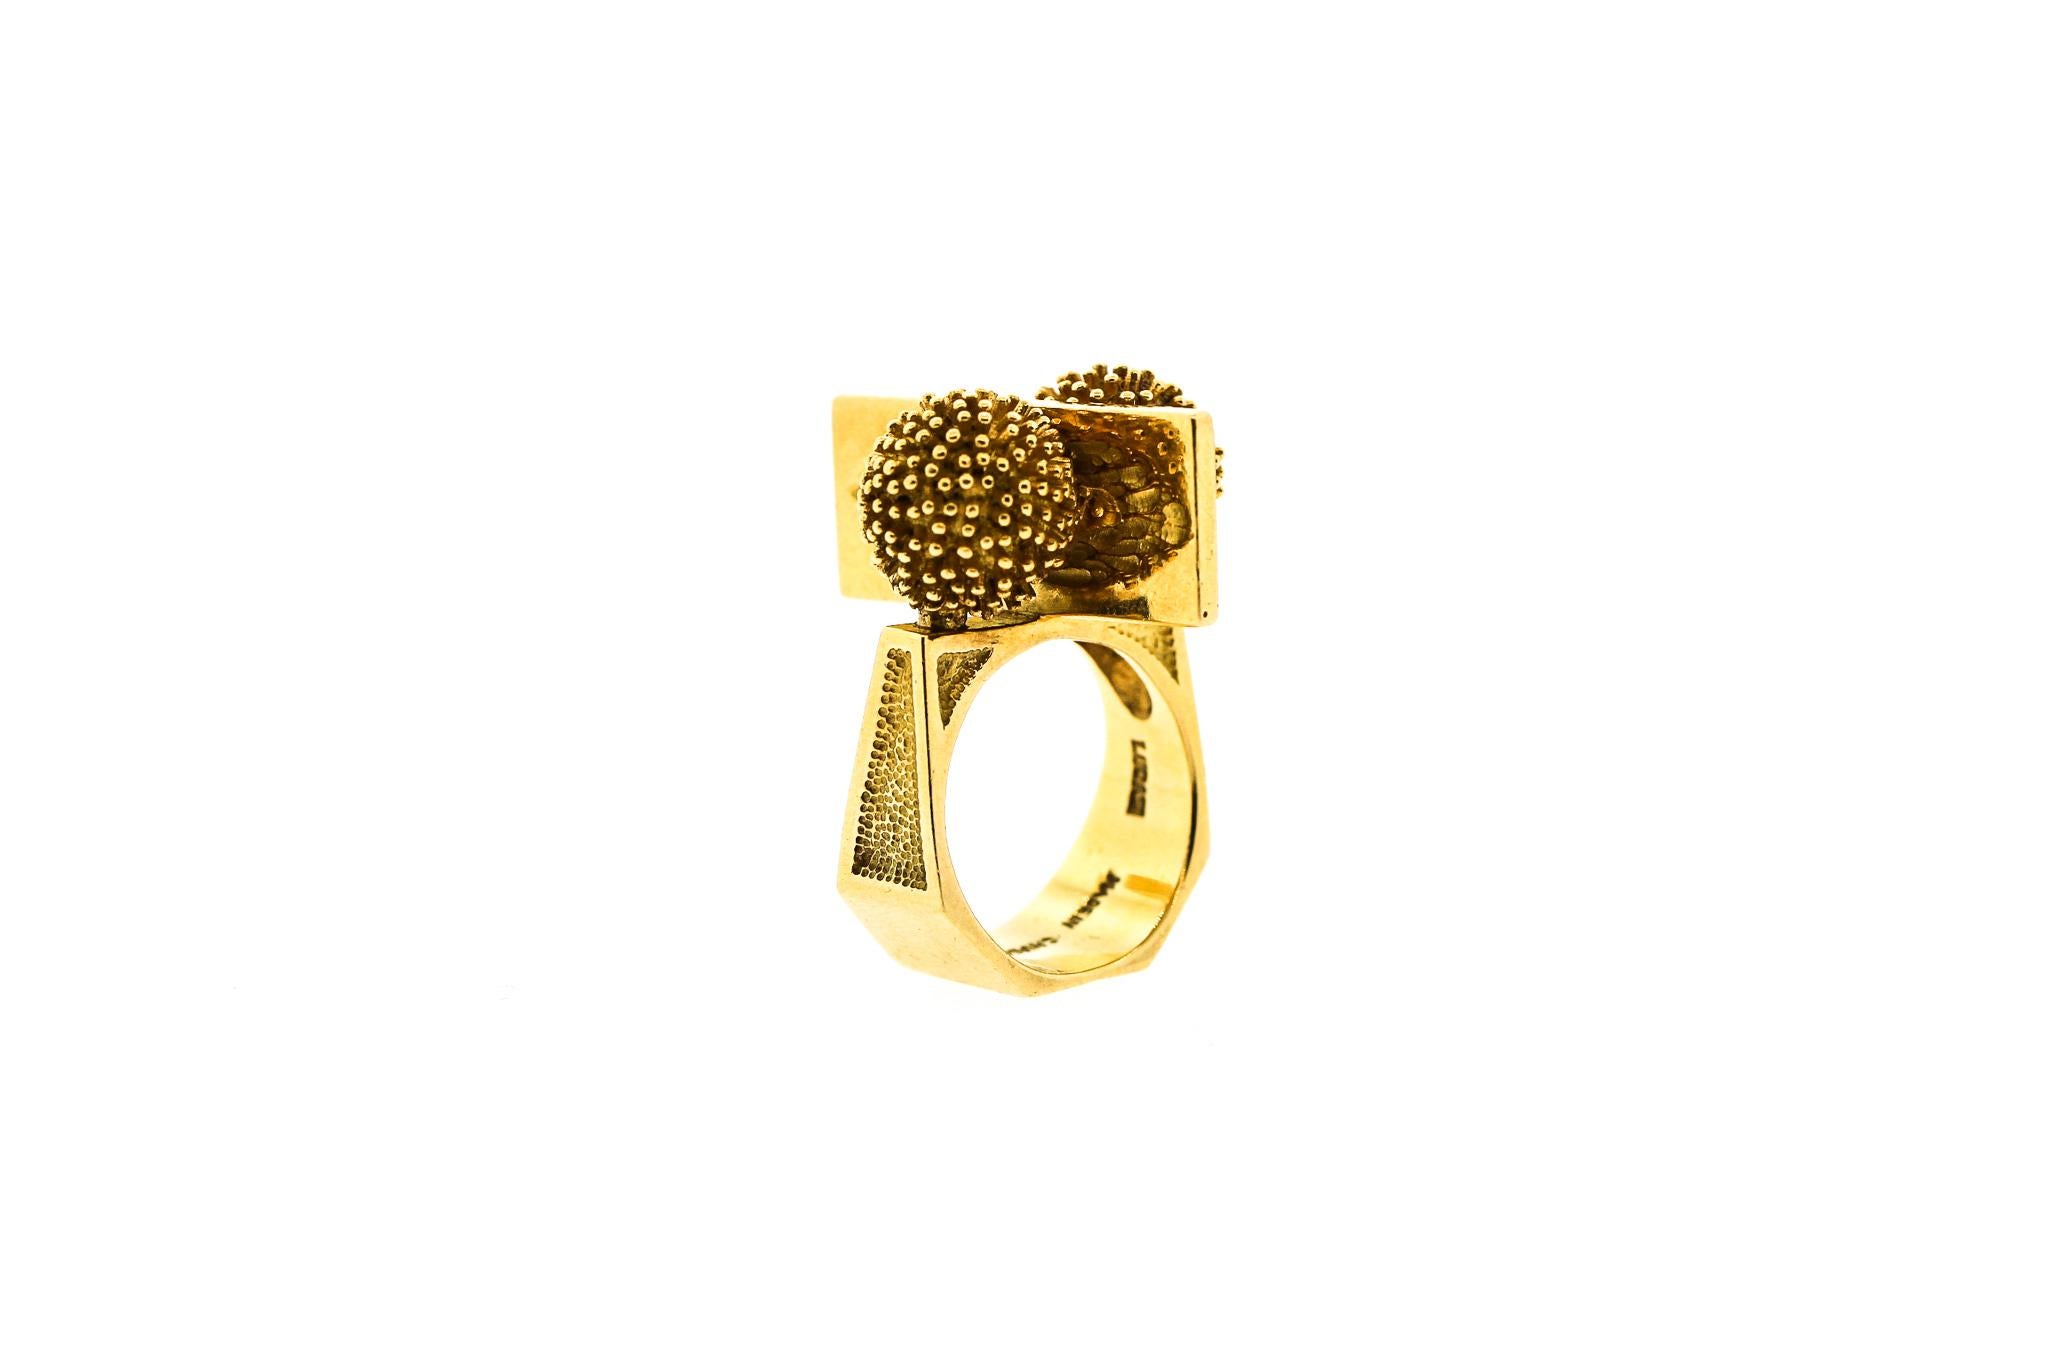 Rare Lucas Cartier 18k Brutalist gold ring, circa 1975. Lucas was a designer for Cartier for a short period of time, and his designs were all structural and modern. Now his pieces are recognized and sought after by collectors. This ring has two